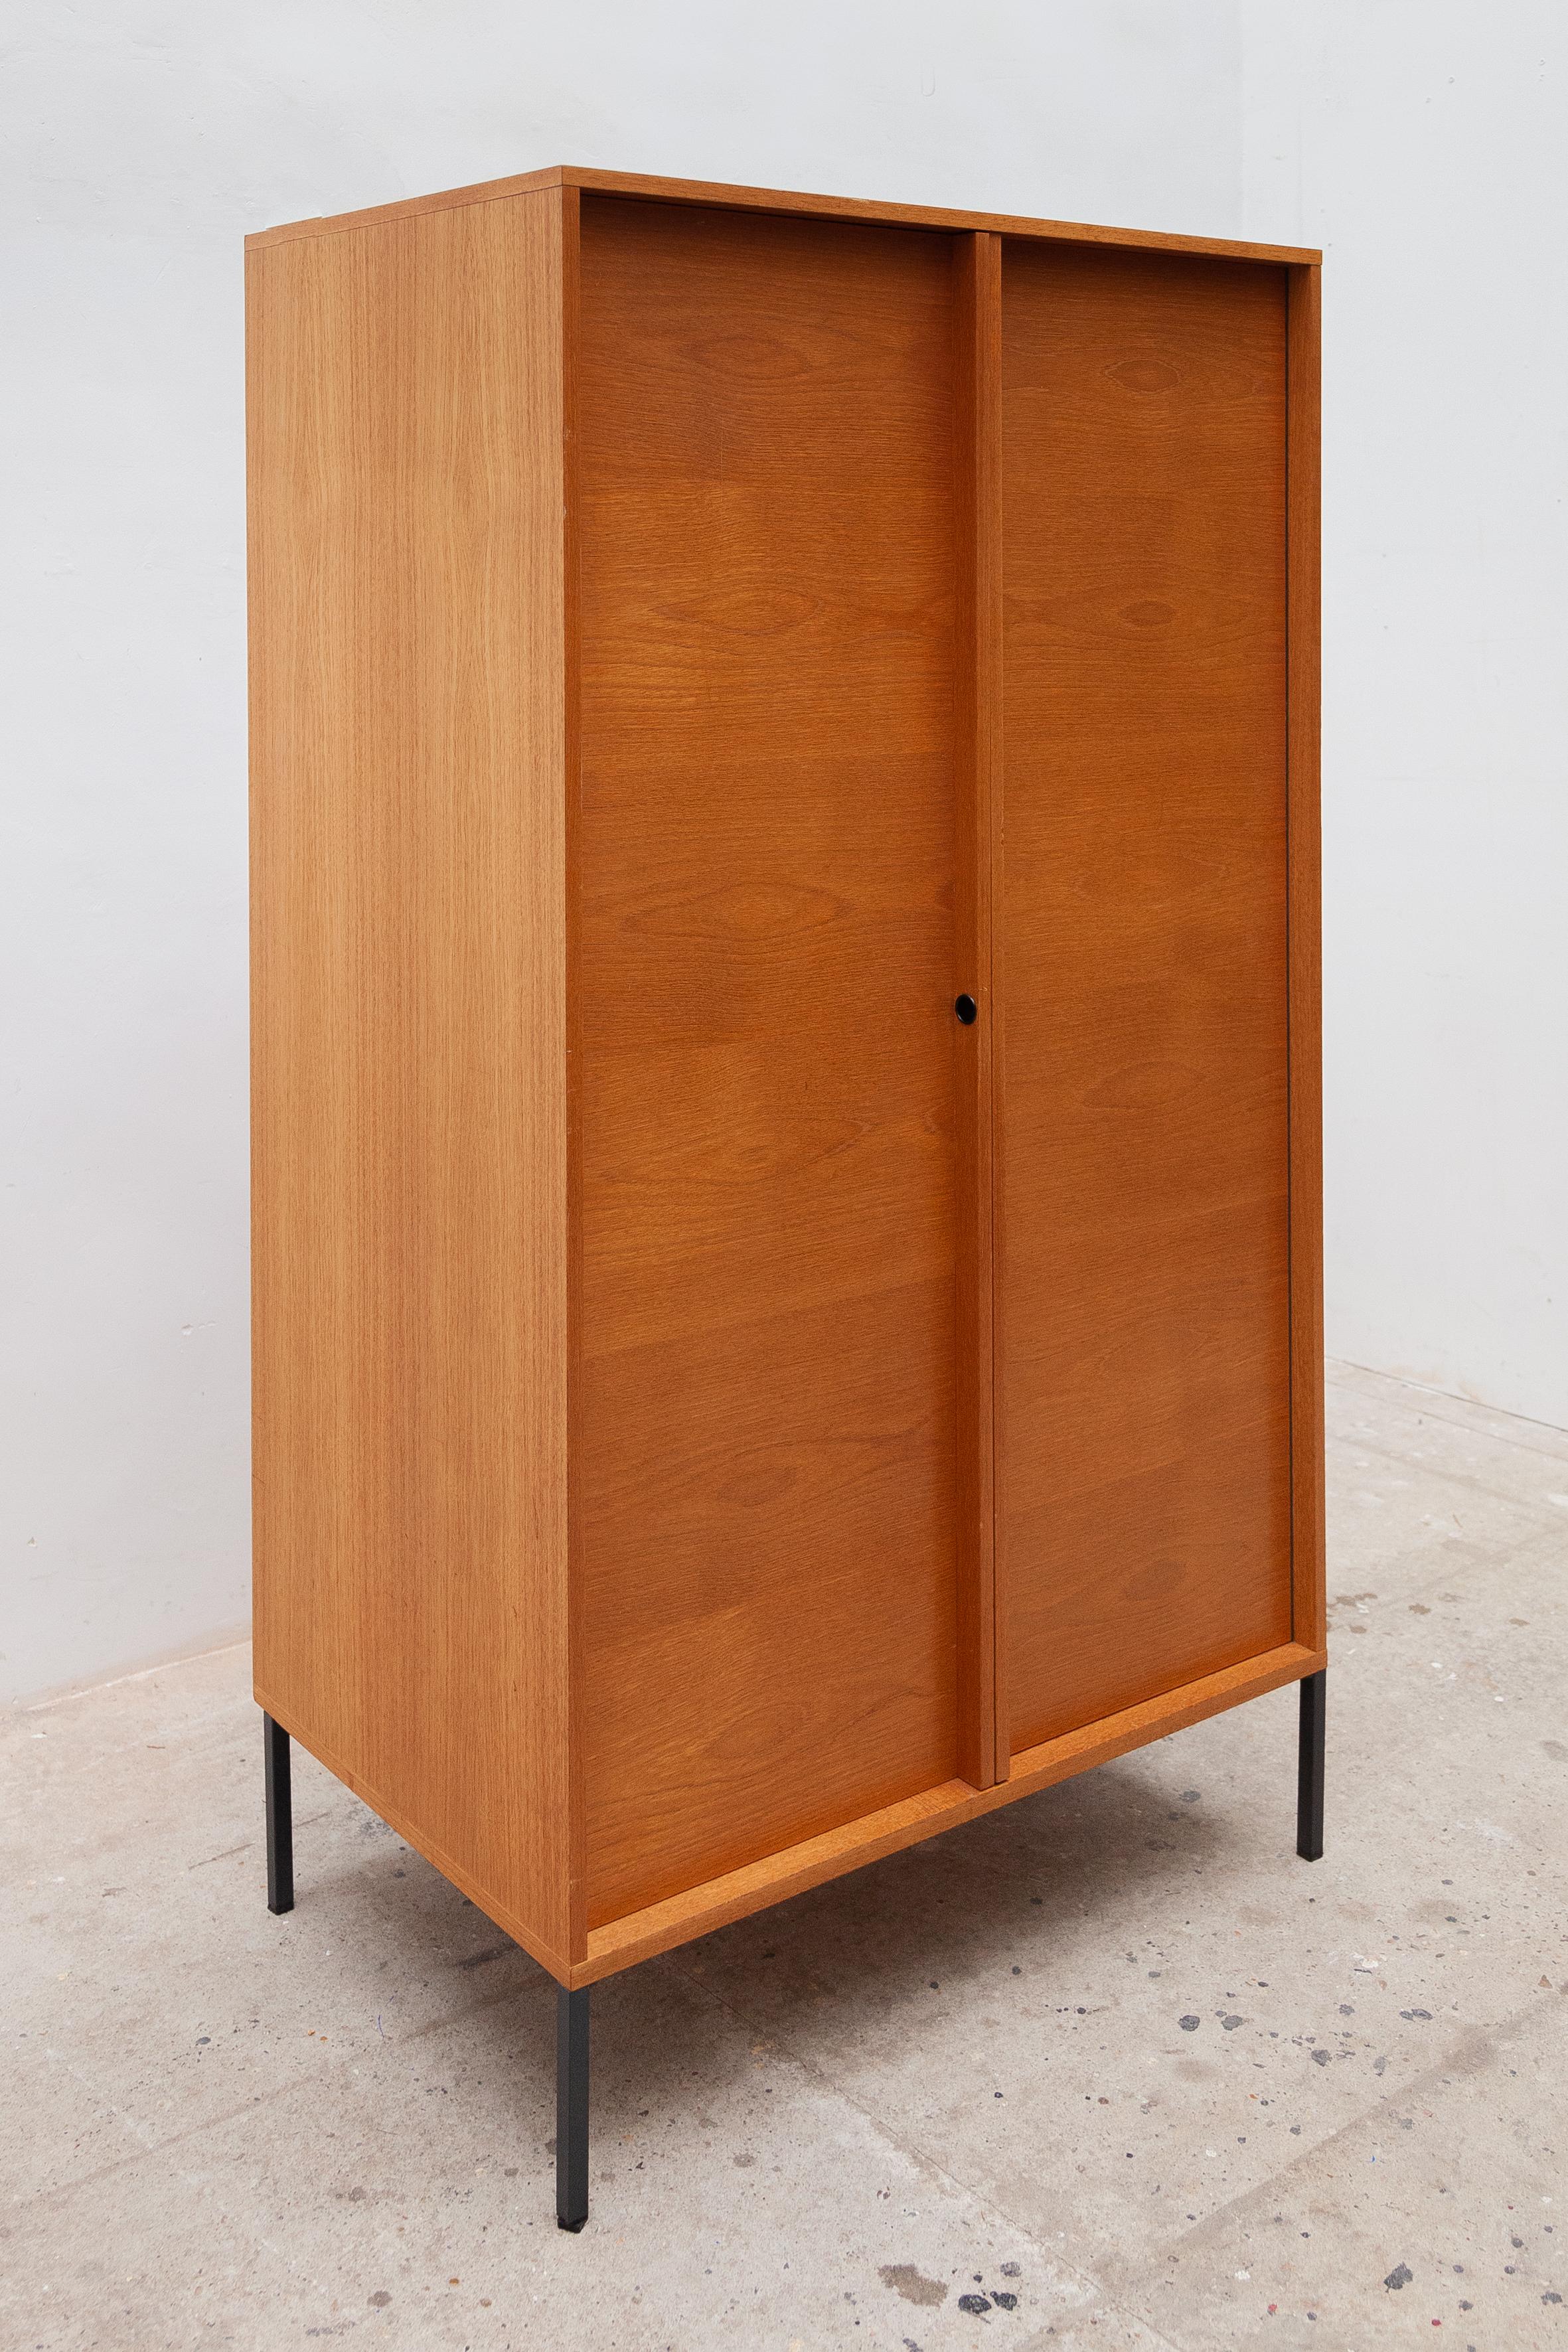 Wardrobe designed in the 60s by the German designer Günther Renkel attention with very good workmanship in high-quality materials The wardrobe is produced by Rego. It's a part of the Twen-Möbel serie that covered an entire room interior. The